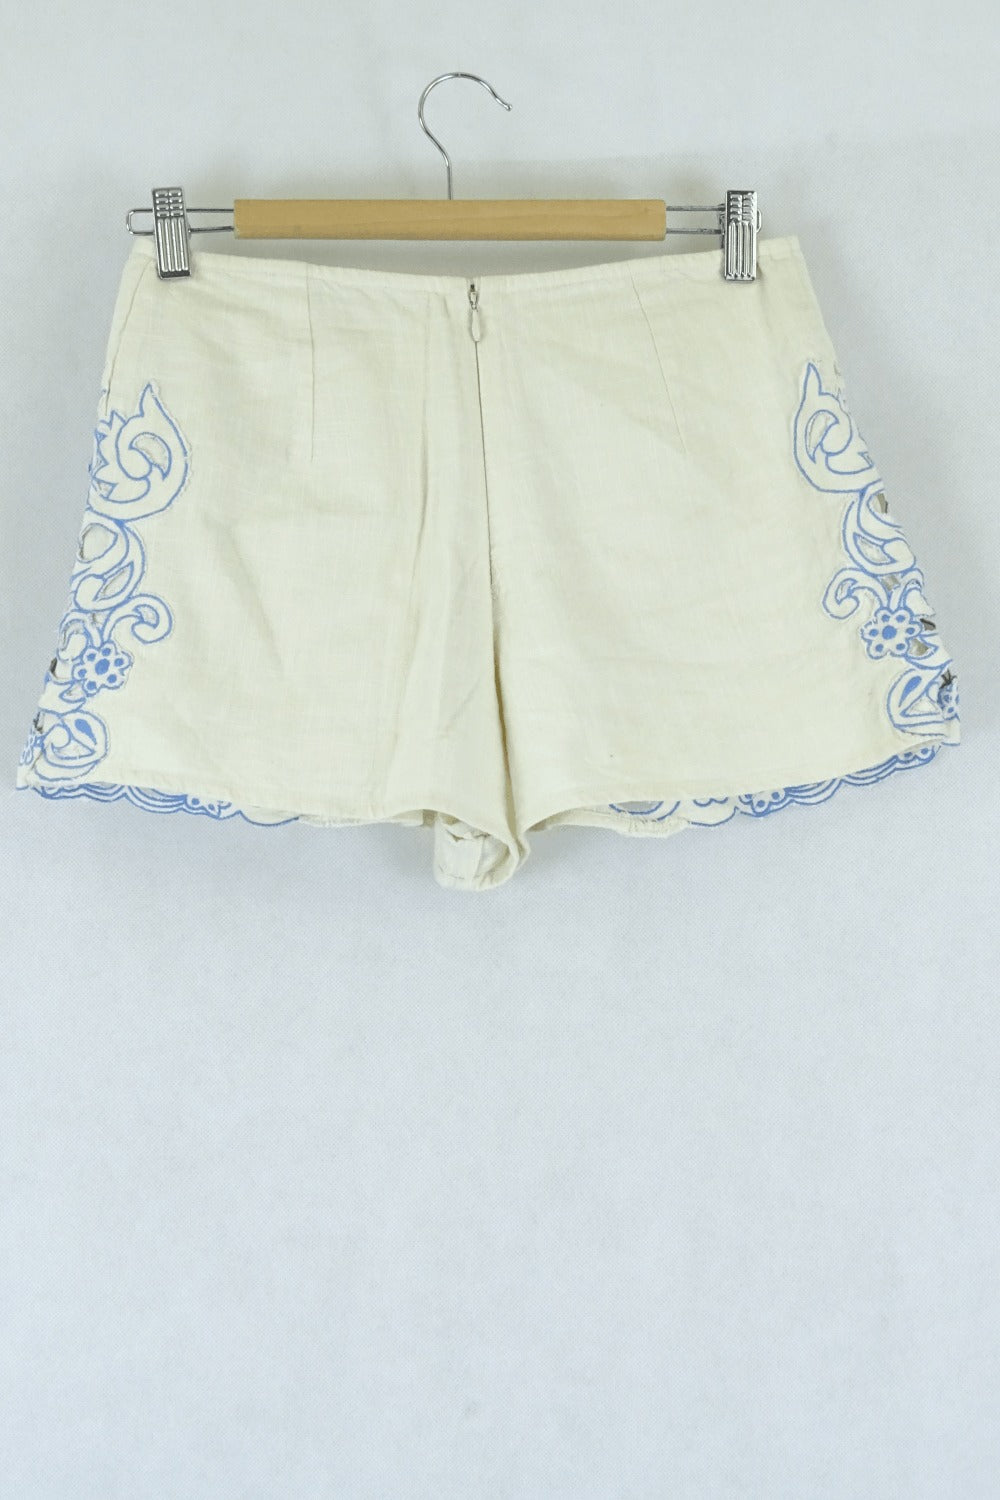 Urban Outfitters Cream And Blue Shorts 2 (Au 6)